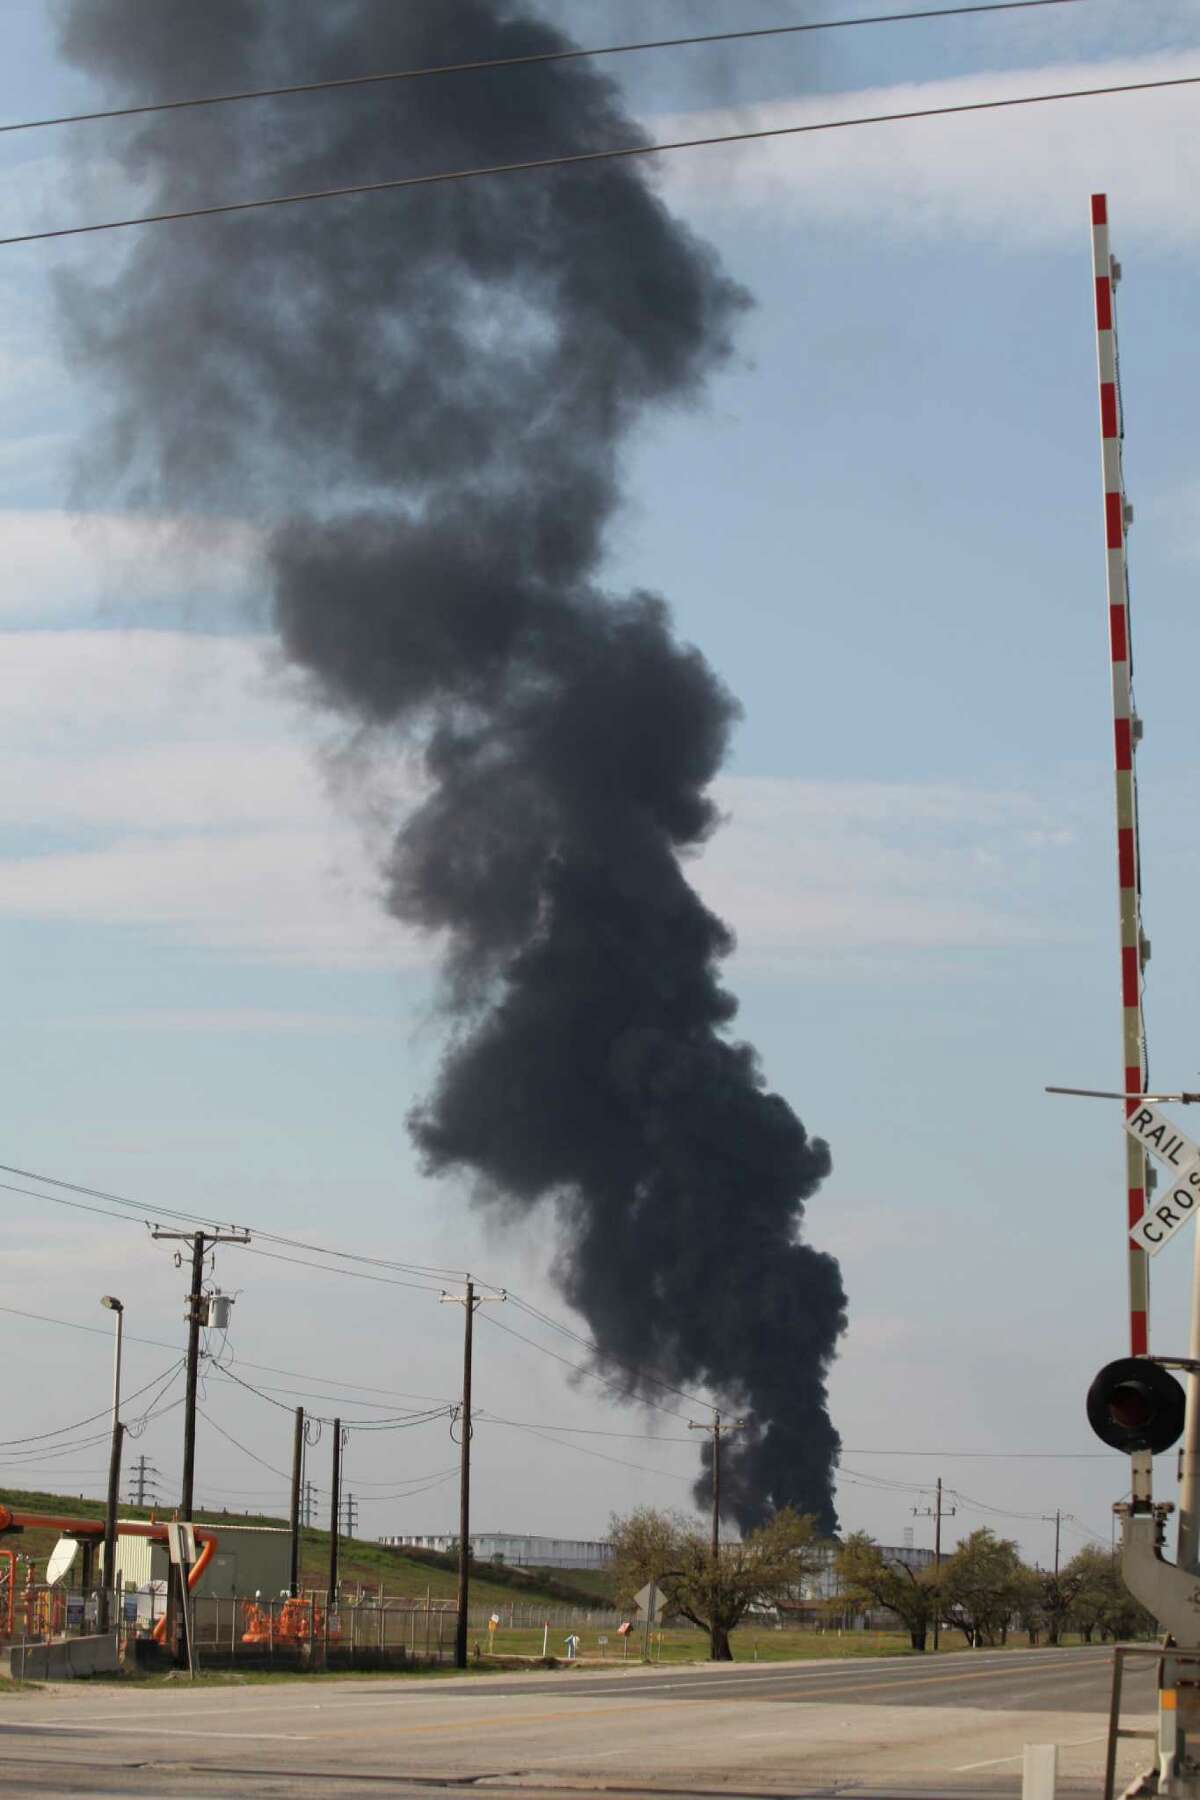 A plume of black smoke rises from the ITC industrial site on March 20, 2019, after an apparent flare-up.